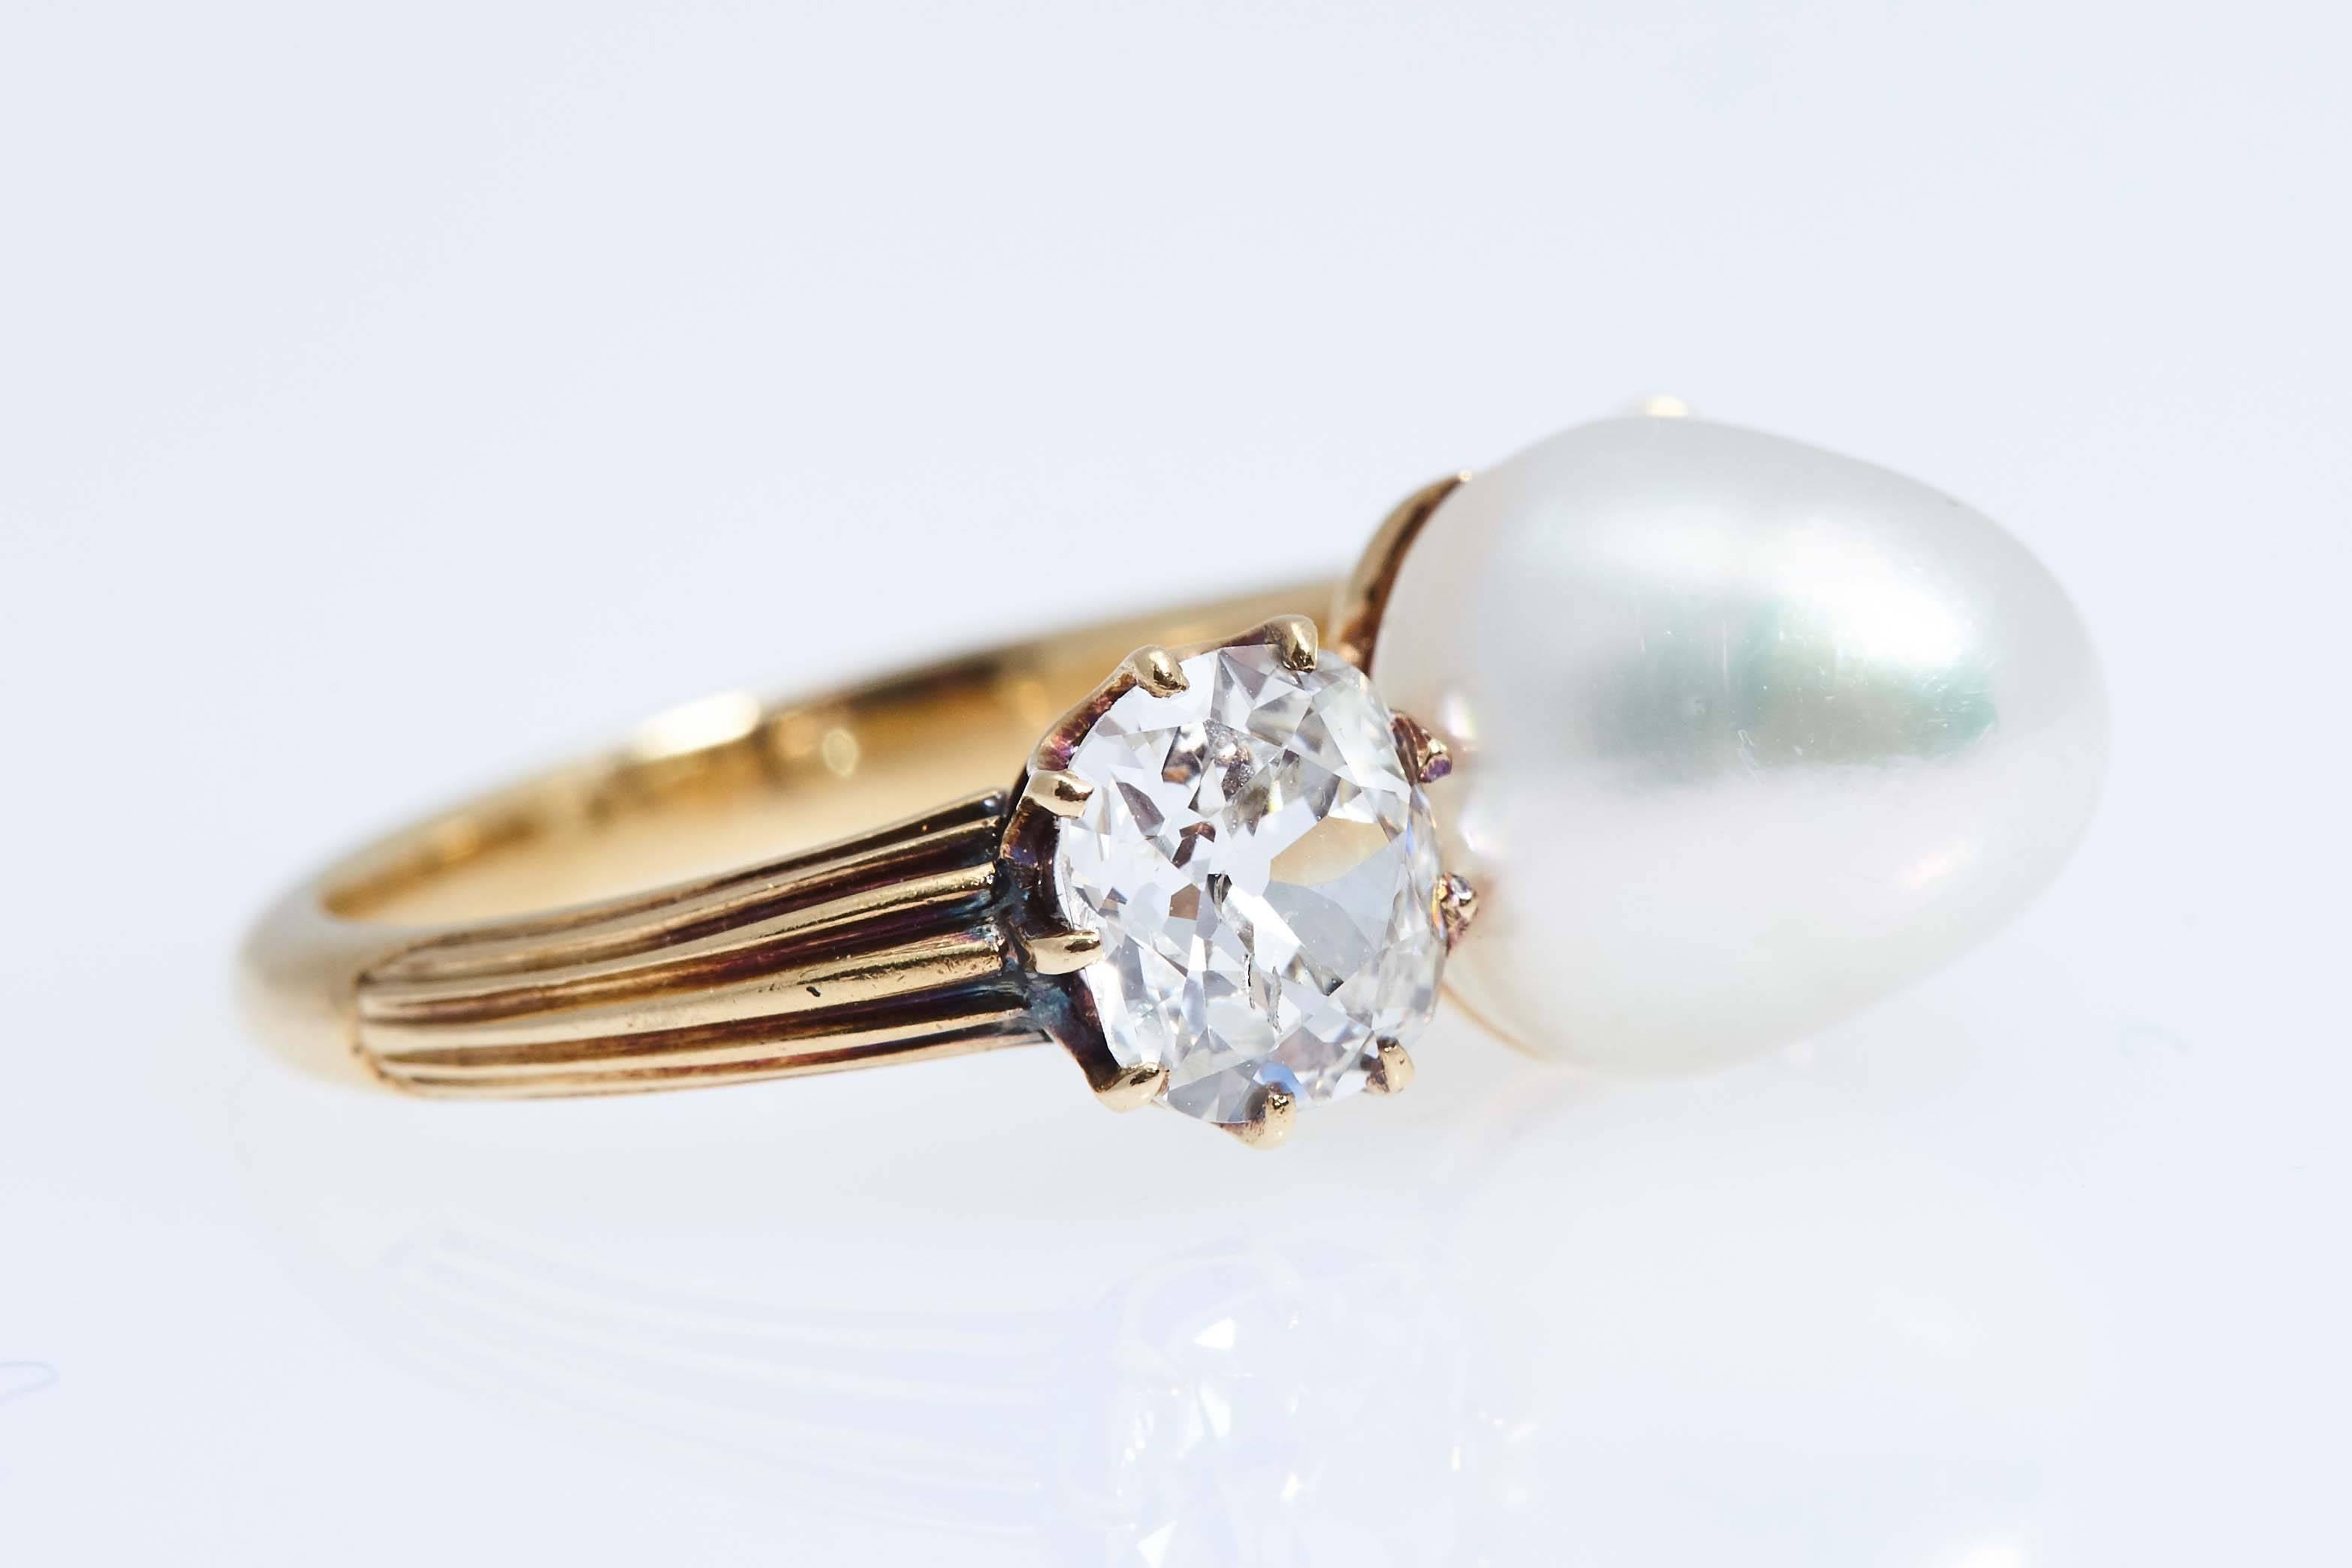 Antique natural pearl and diamond ring.  The two diamonds are old european cuts and weigh approximately 1.70 carats.  Finger size 5 1/4.